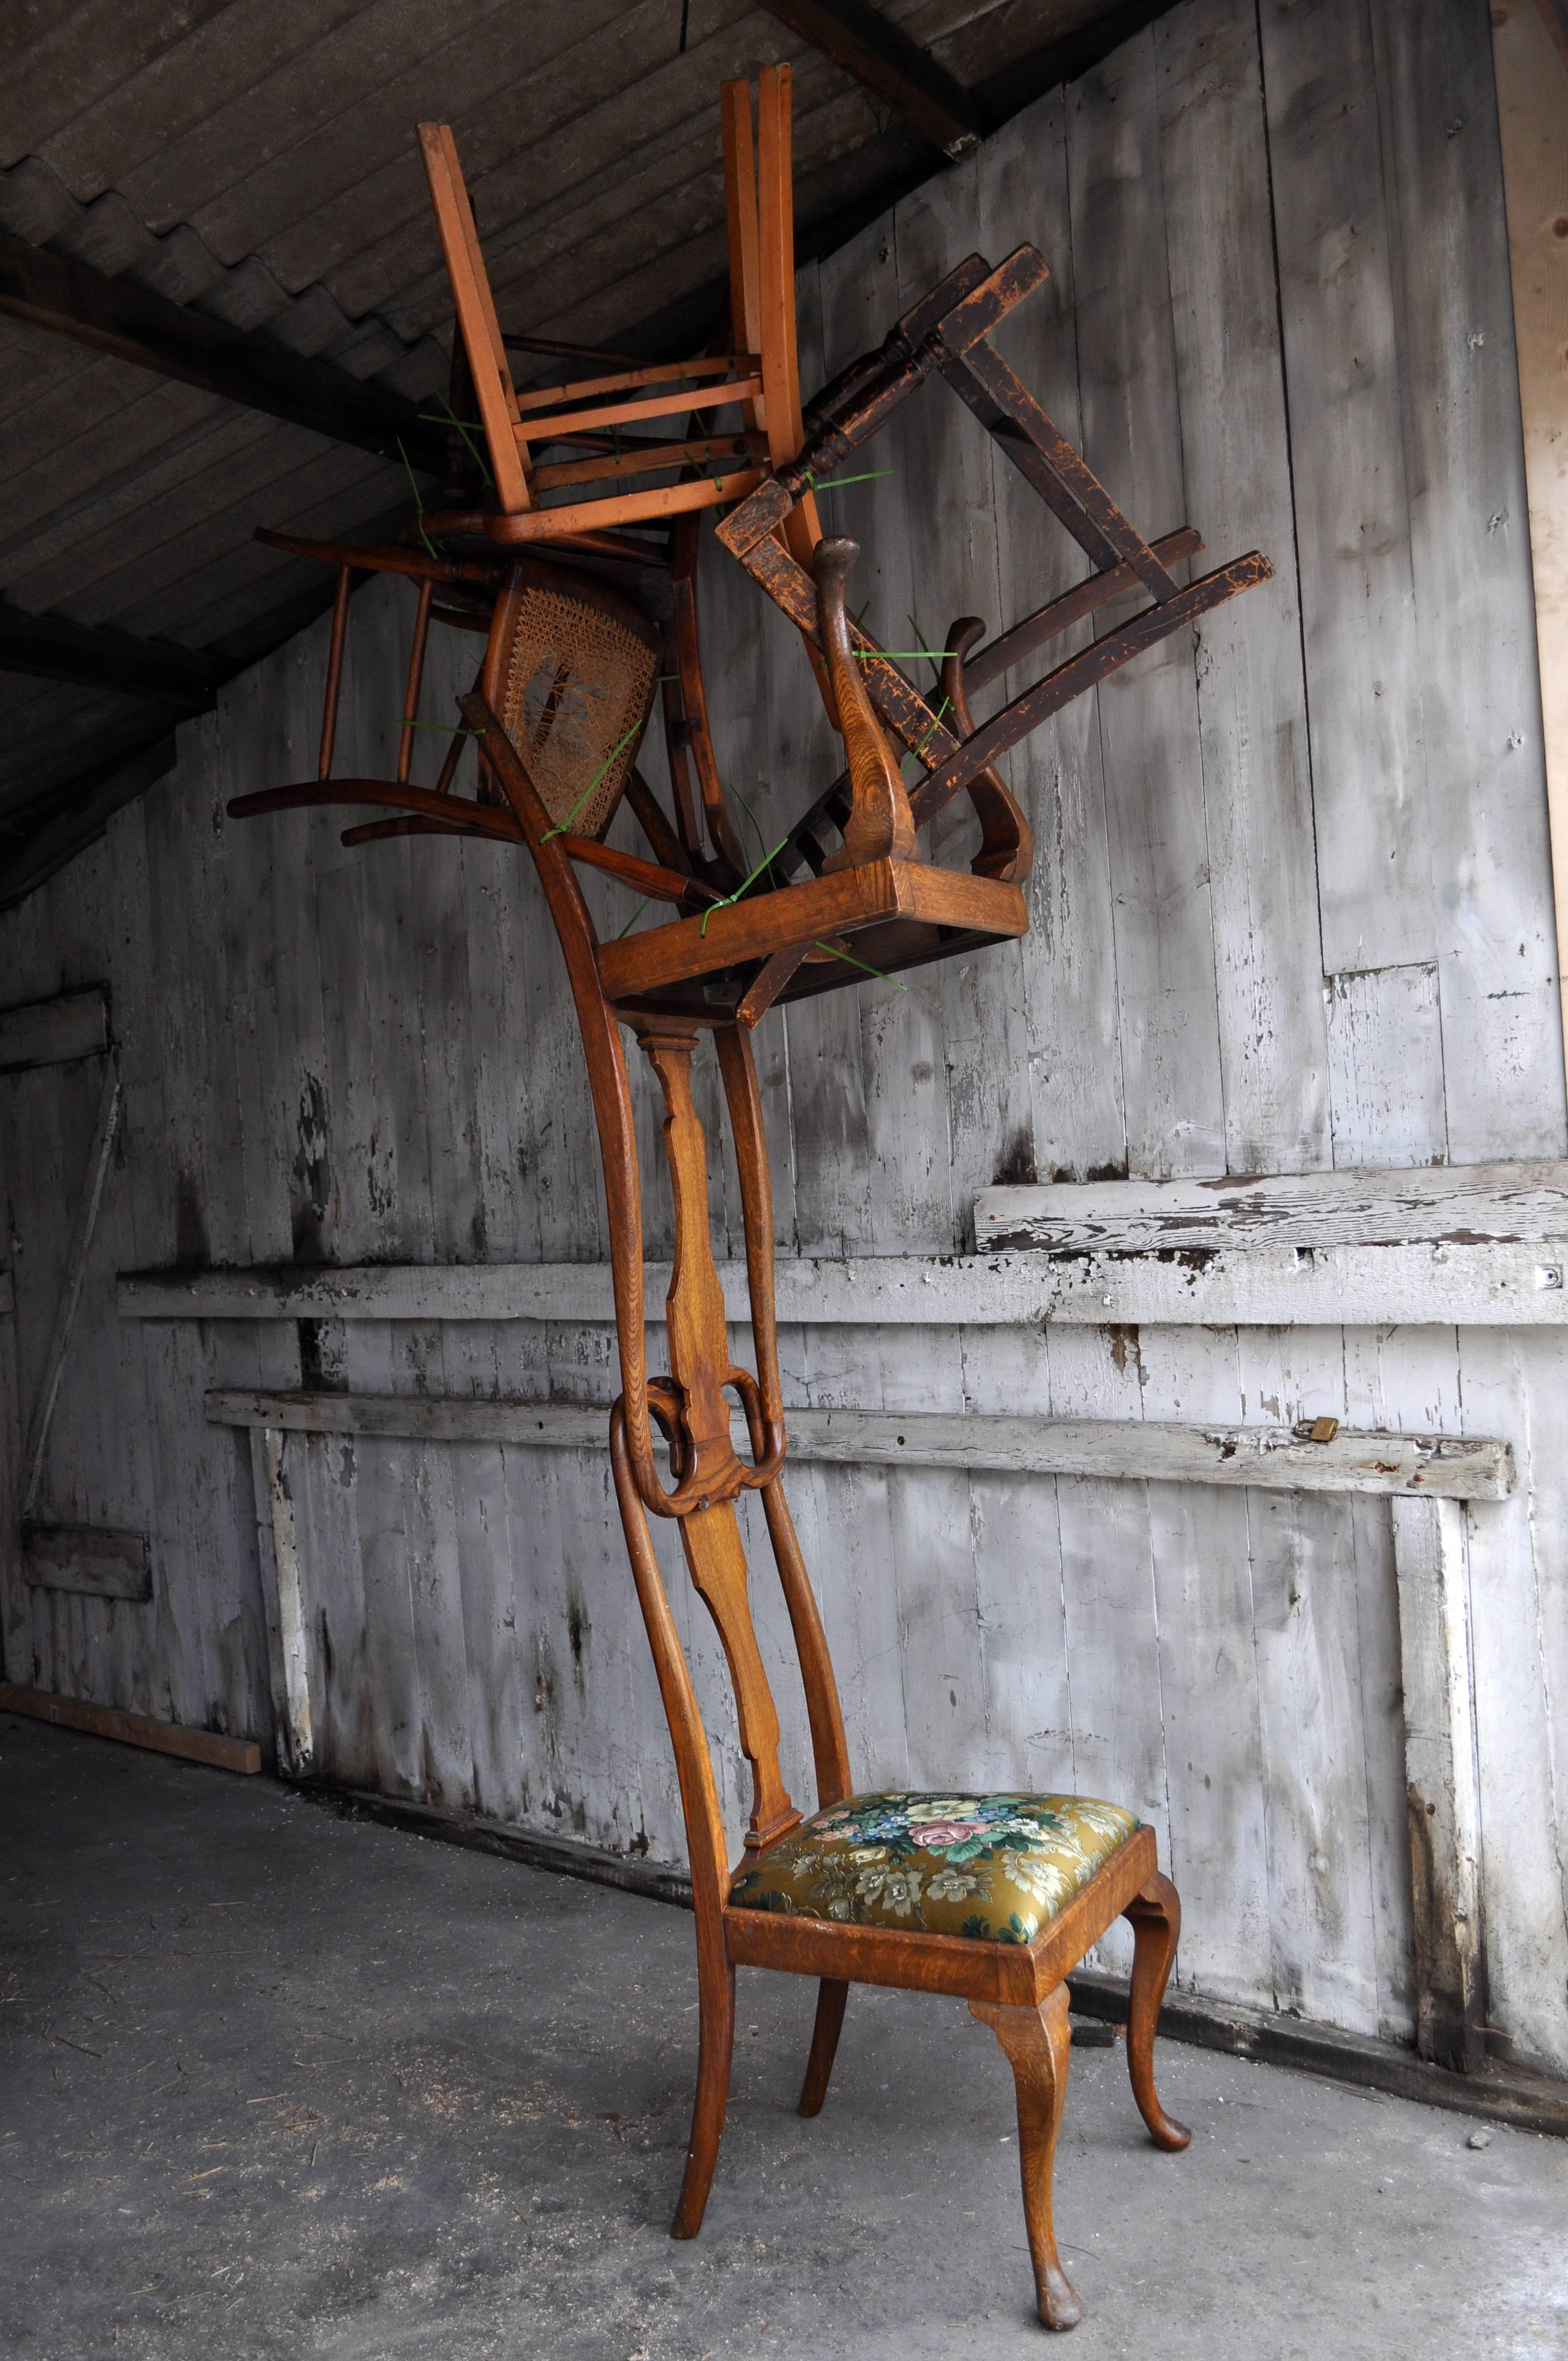 A surreal pair of trees for a living room. Constructed from discarded chairs collected from around Portsmouth.